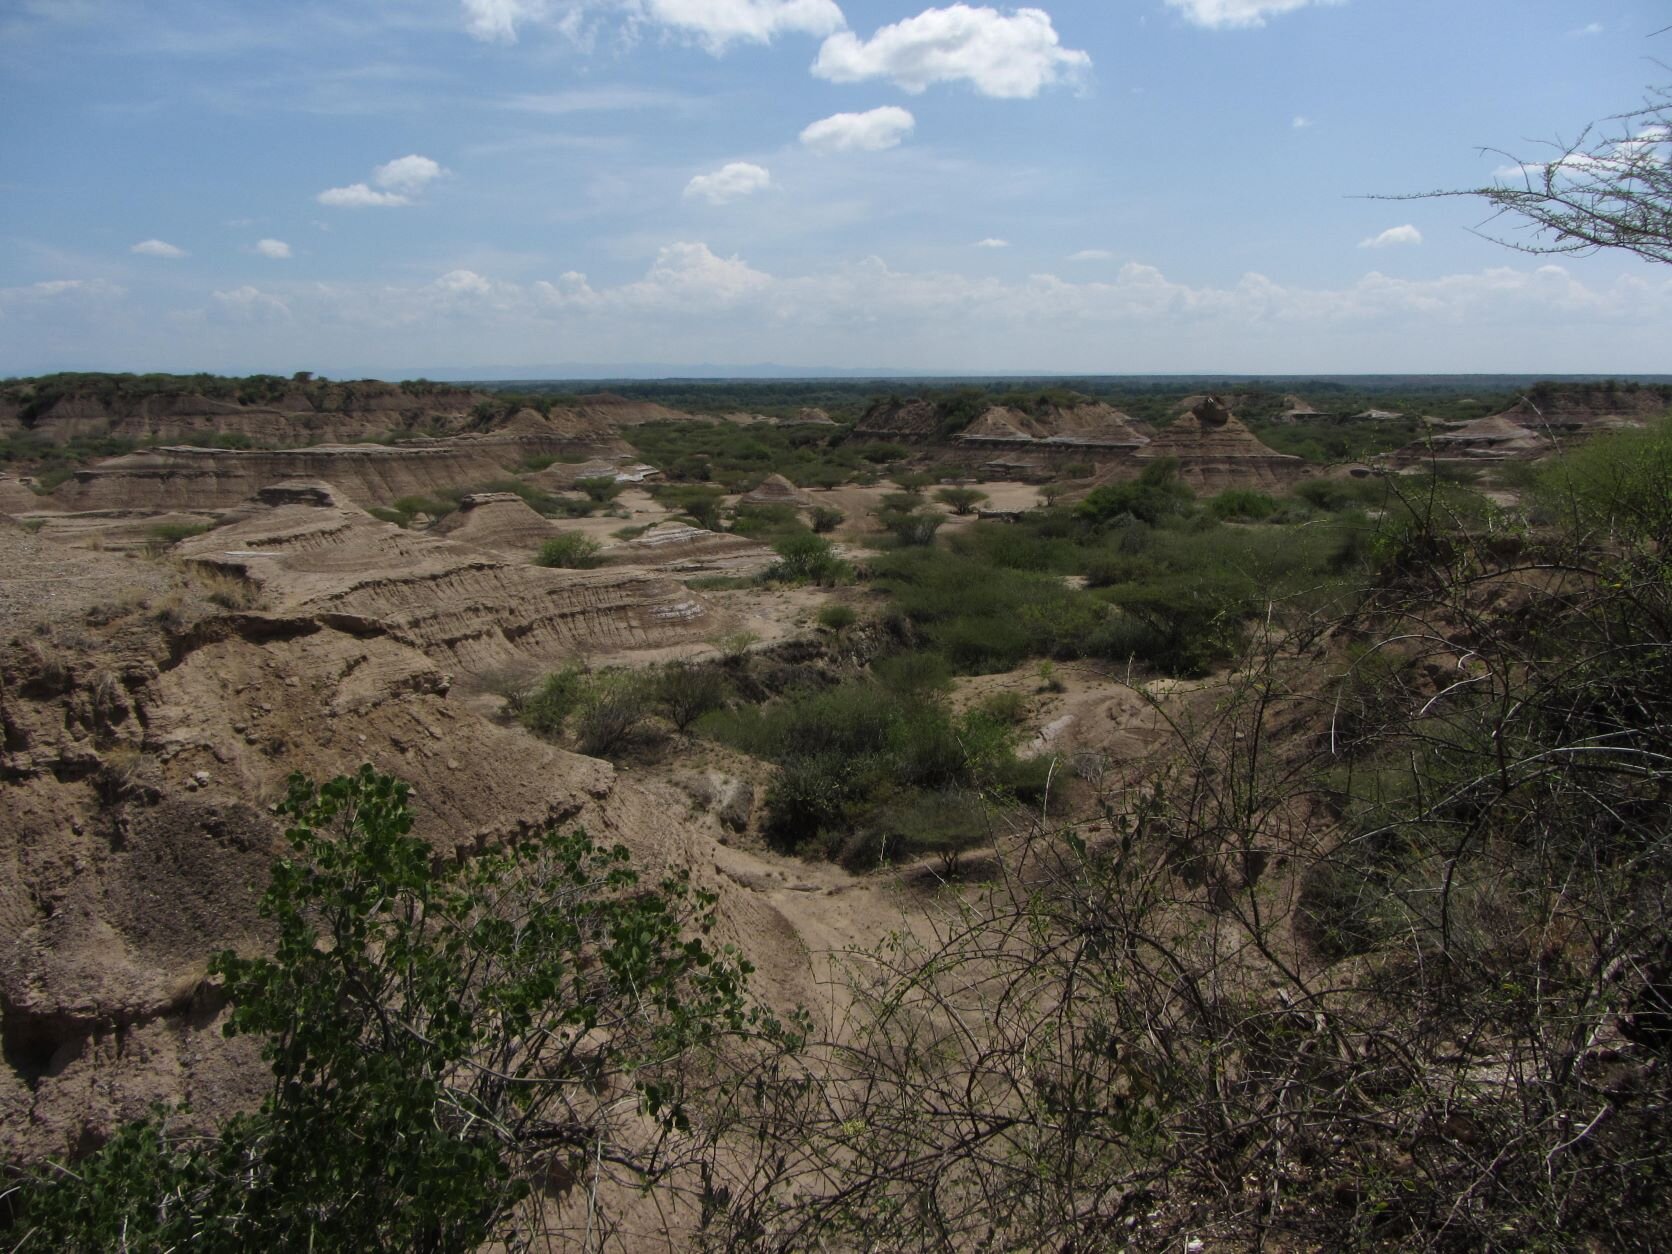 Earliest human remains in eastern Africa dated to more than 230,000 years ago